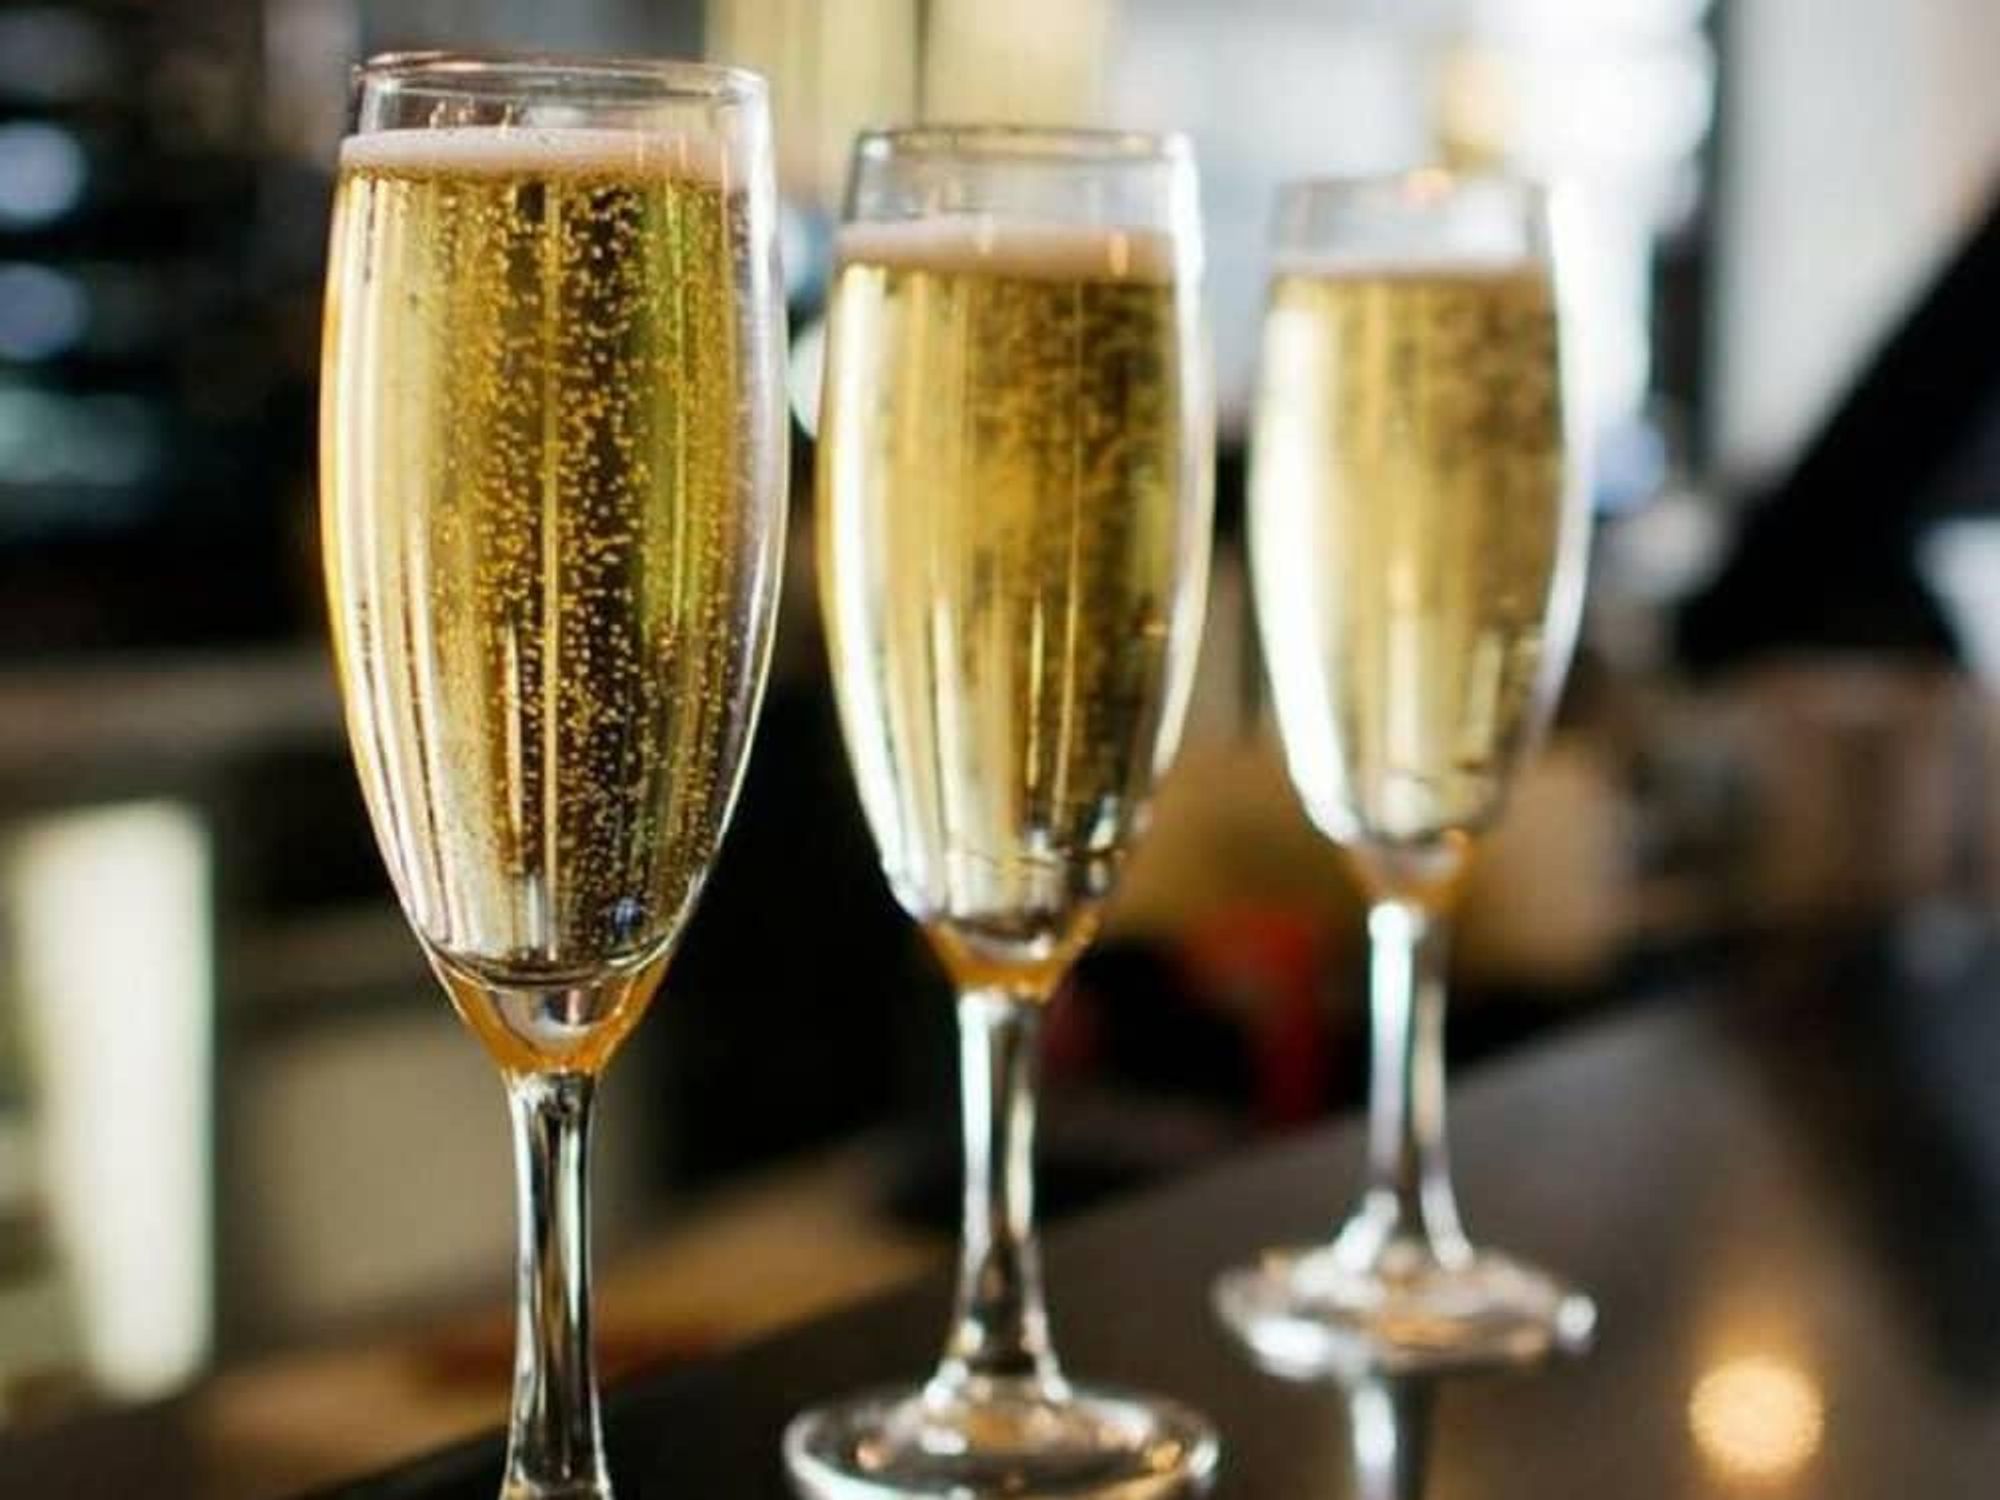 https://dallas.culturemap.com/media-library/flour-and-vine-champagne-glass.jpg?id=31480148&width=2000&height=1500&quality=85&coordinates=0%2C0%2C0%2C0